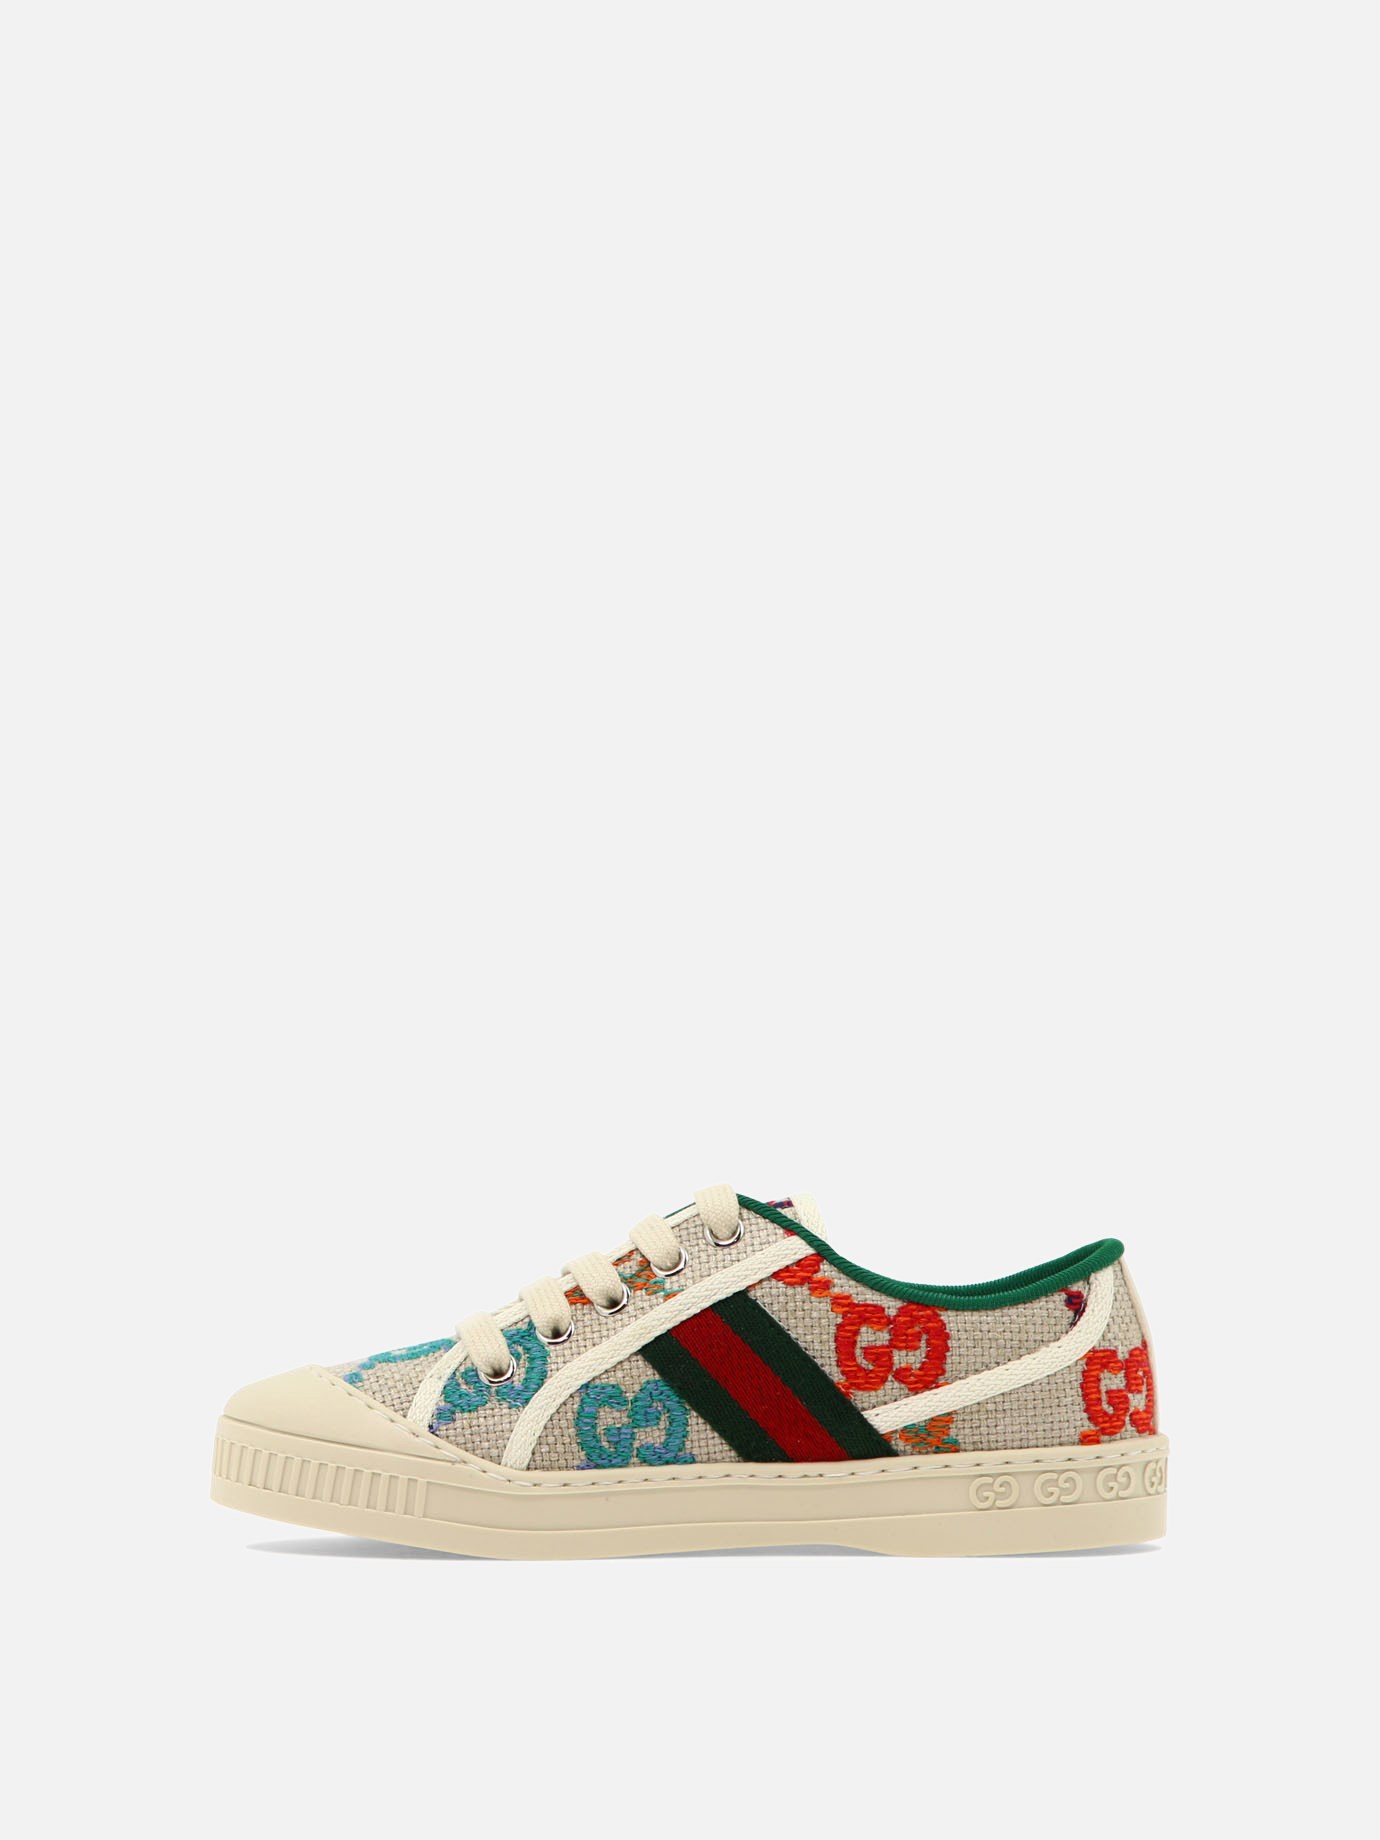  Tennis 1977  sneakers by Gucci Kids